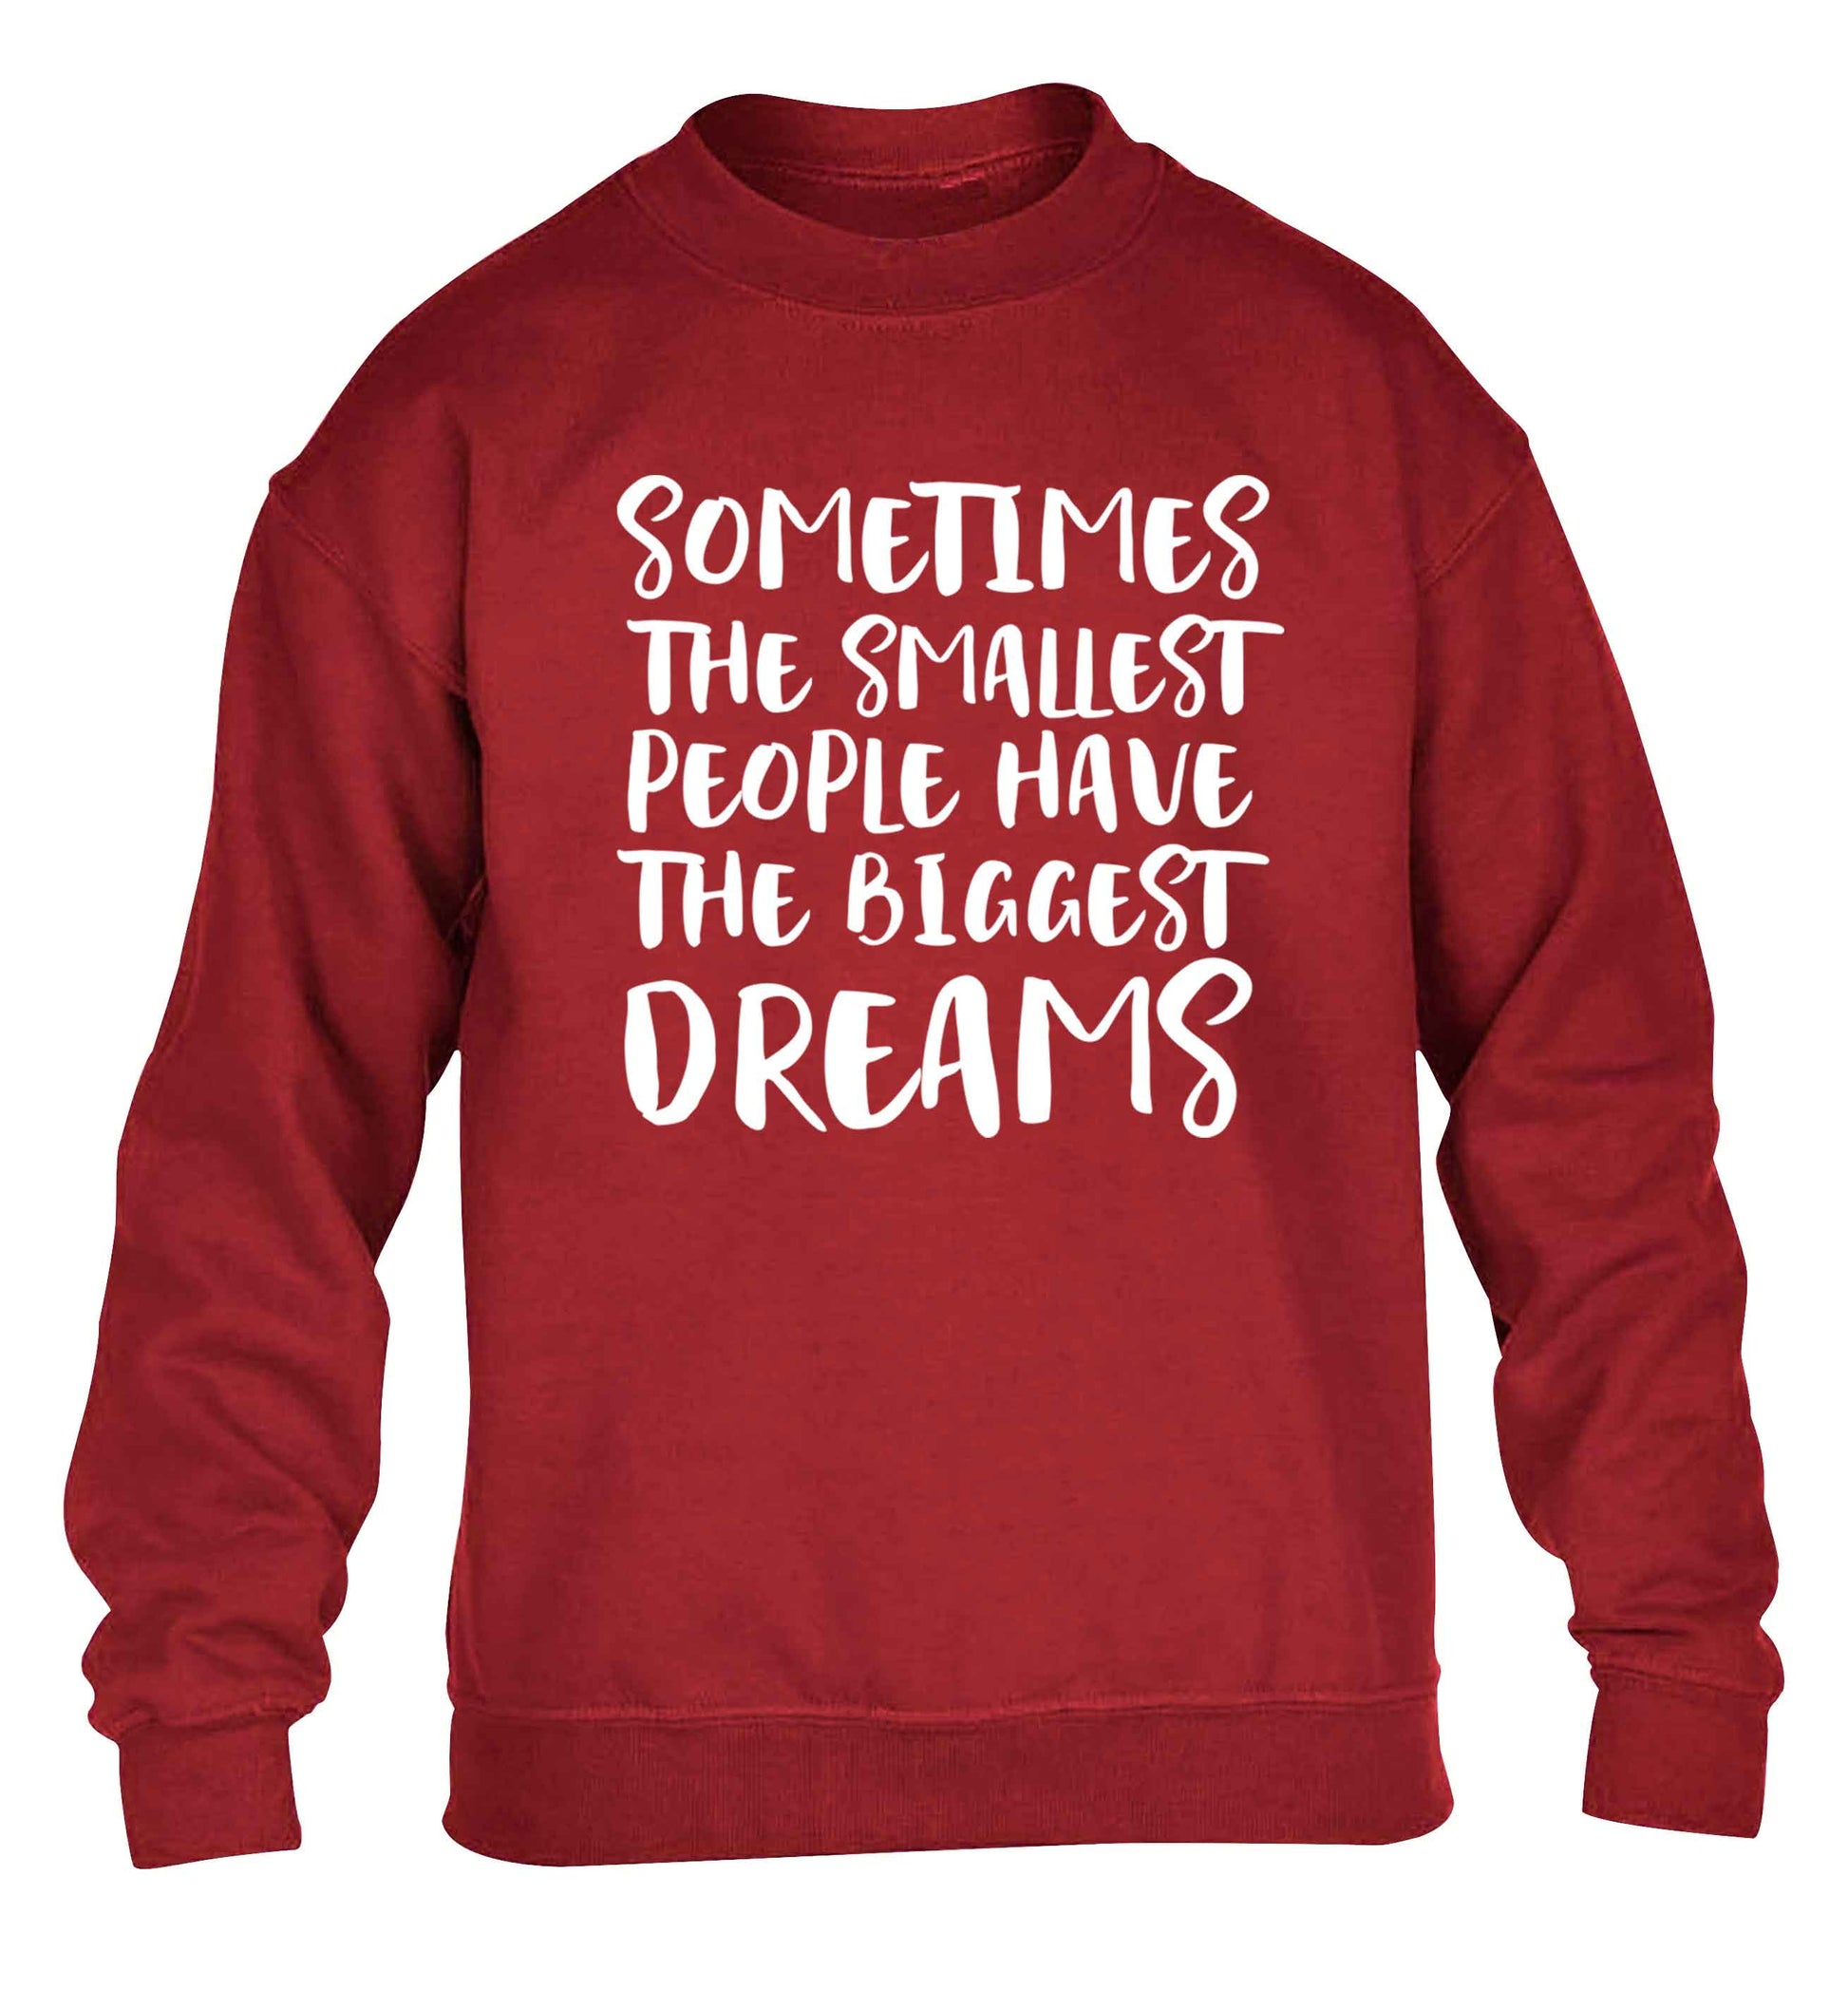 Sometimes the smallest people have the biggest dreams children's grey sweater 12-13 Years